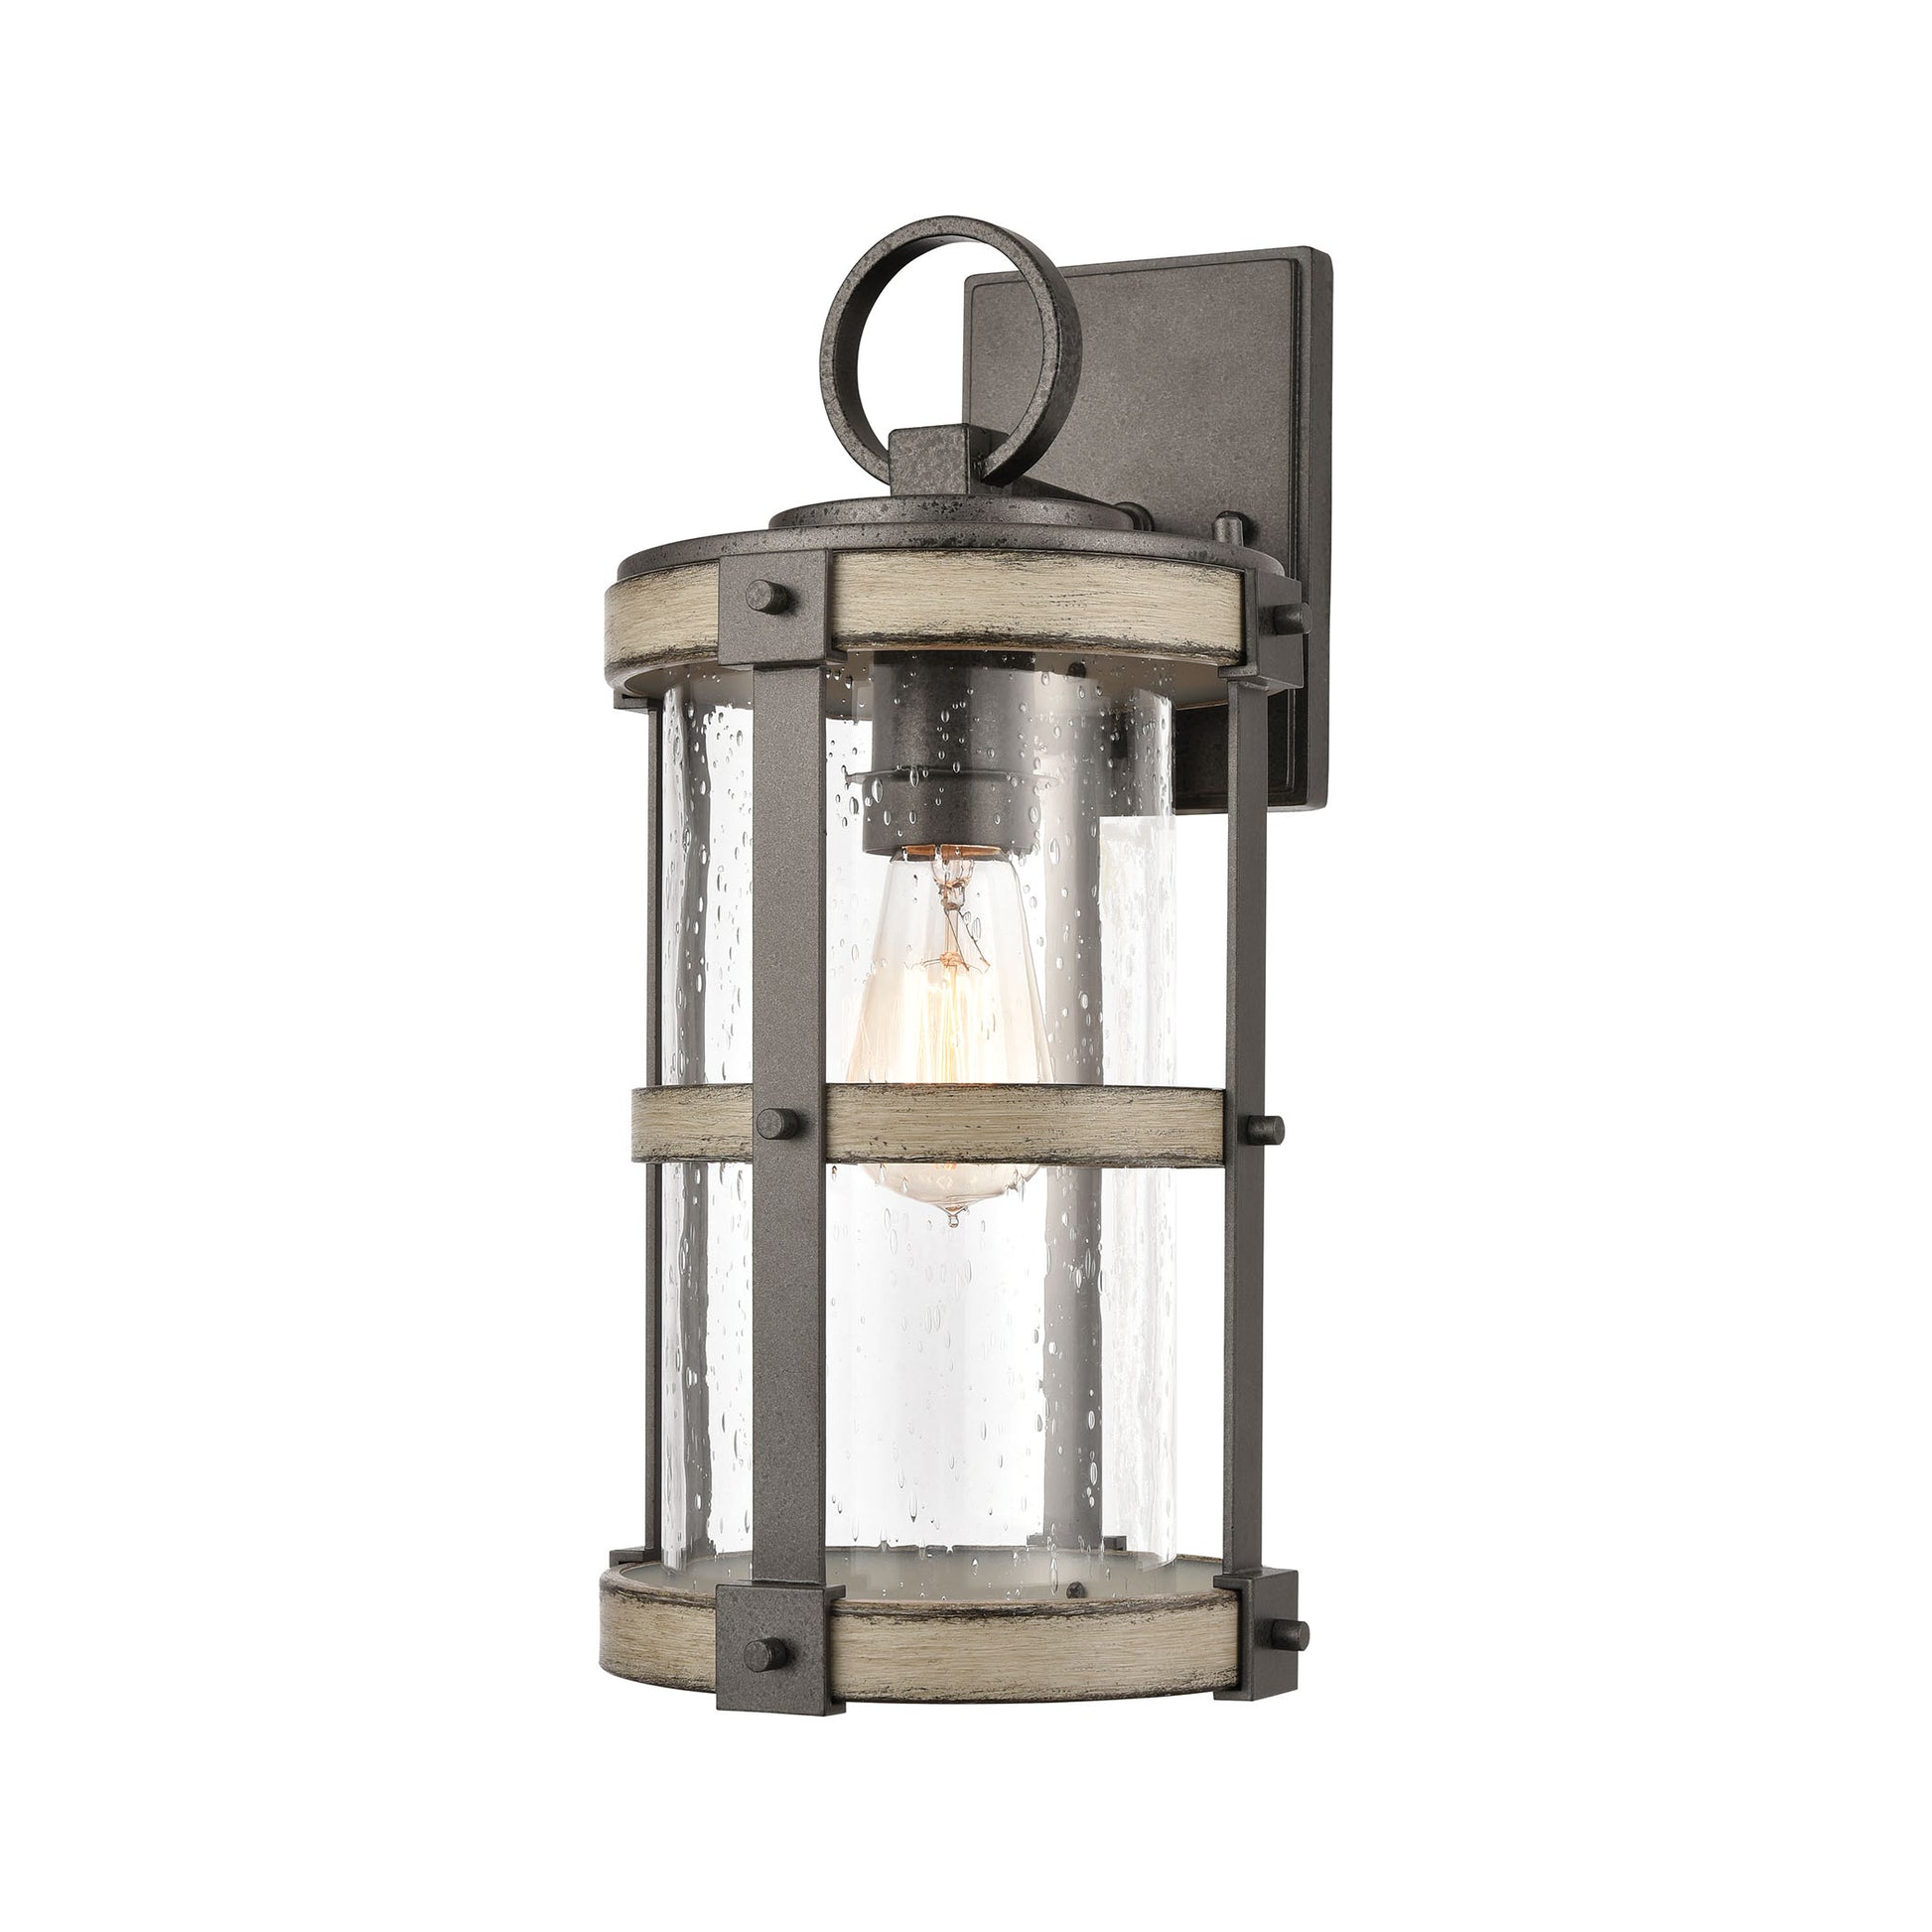 Crenshaw 1-Light Outdoor Wall Lamps in Anvil Iron and Distressed Antique Graywood with Seedy Glass by ELK Lighting-2